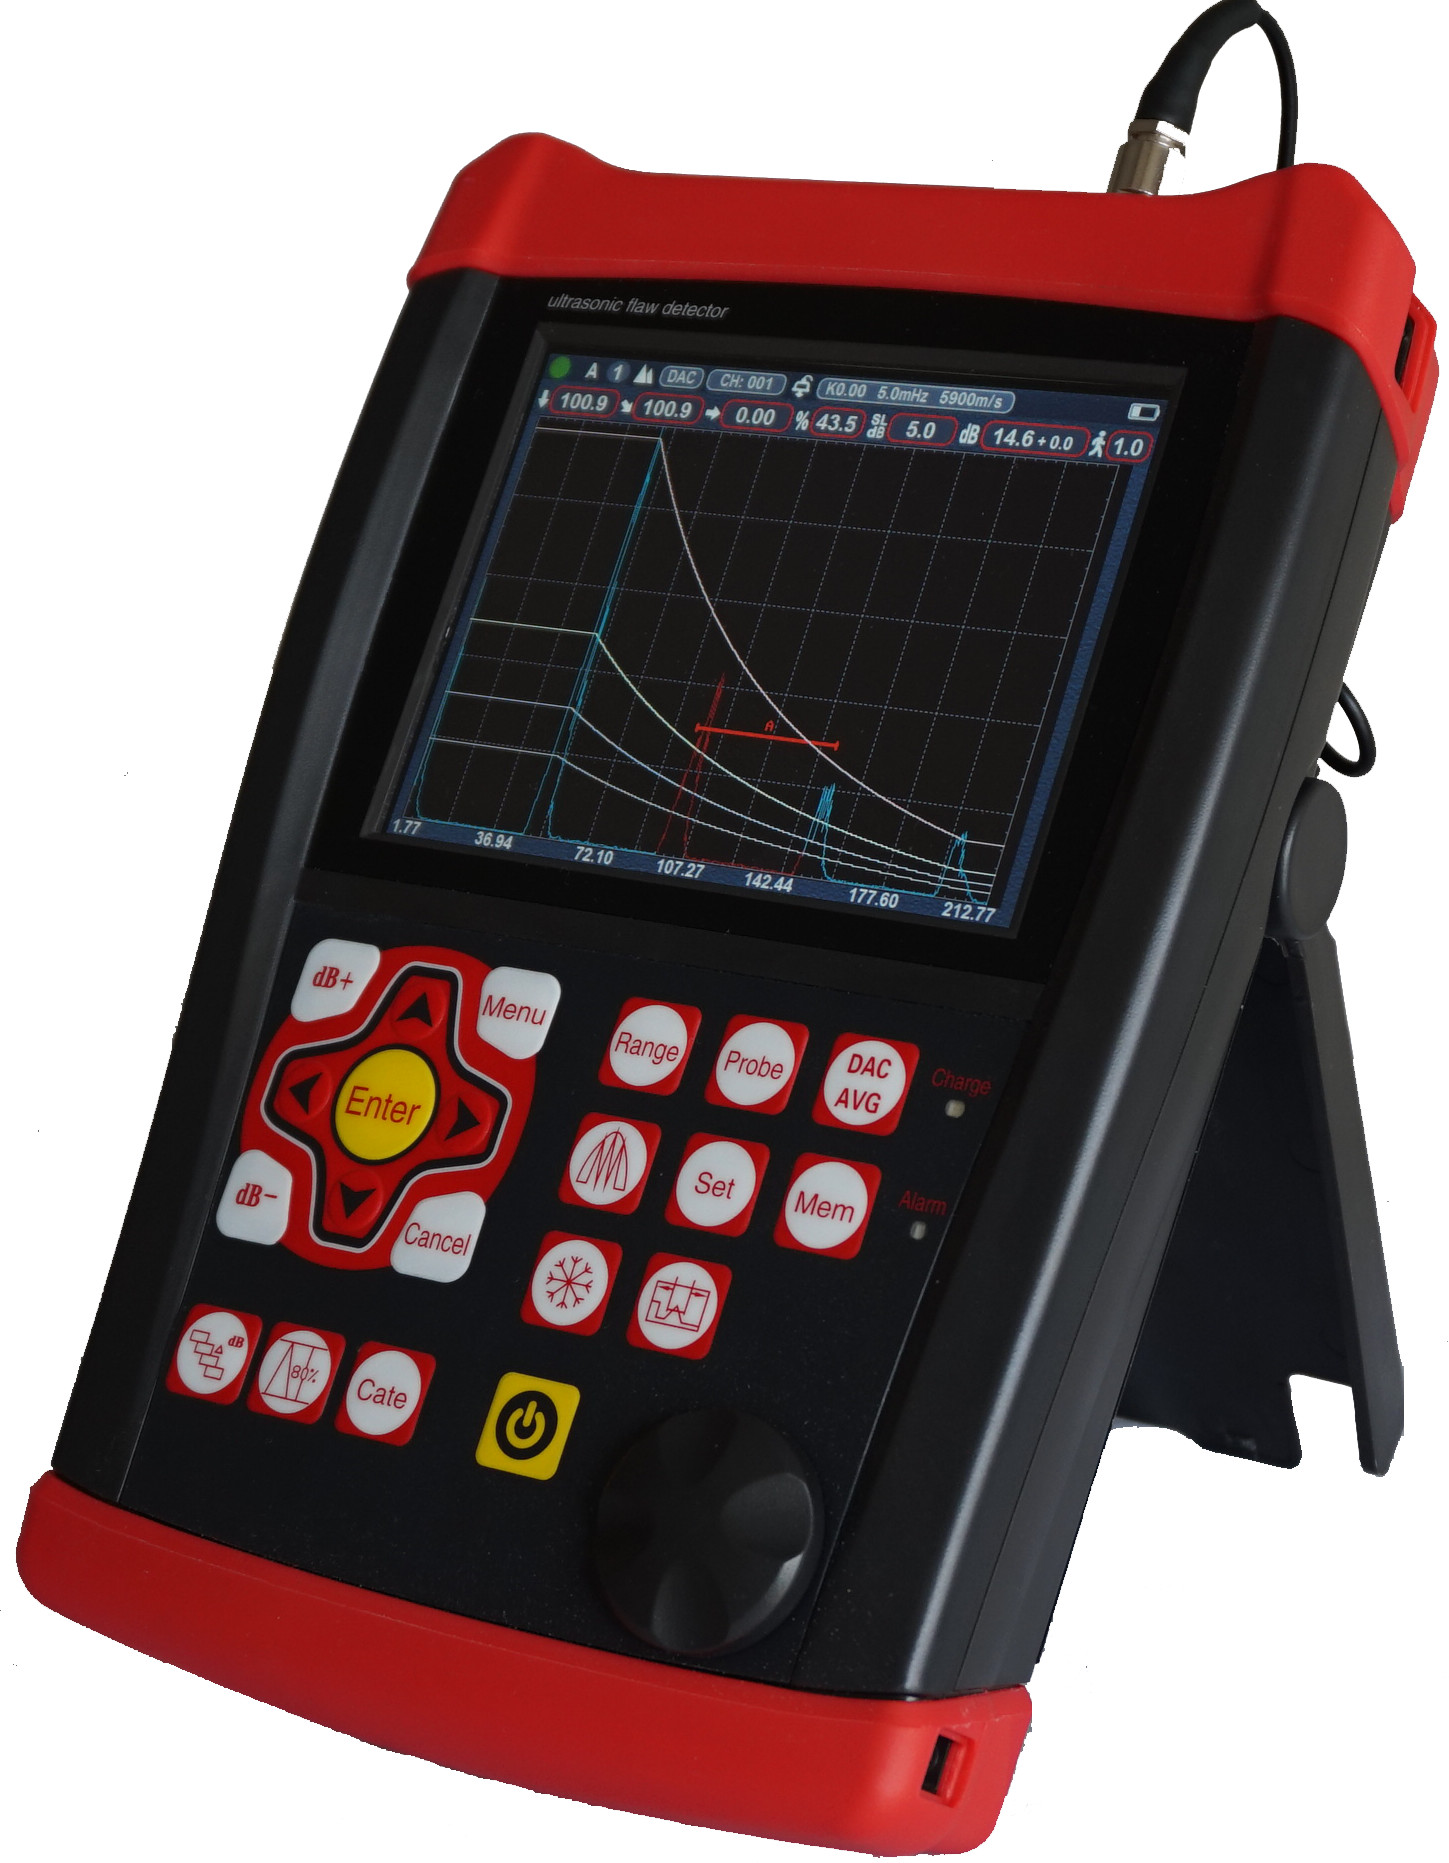 Ultrasound flaw detector, flaw detector ultrasonic,ndt ultrasonic equipment,ultrasonic inspection equipment